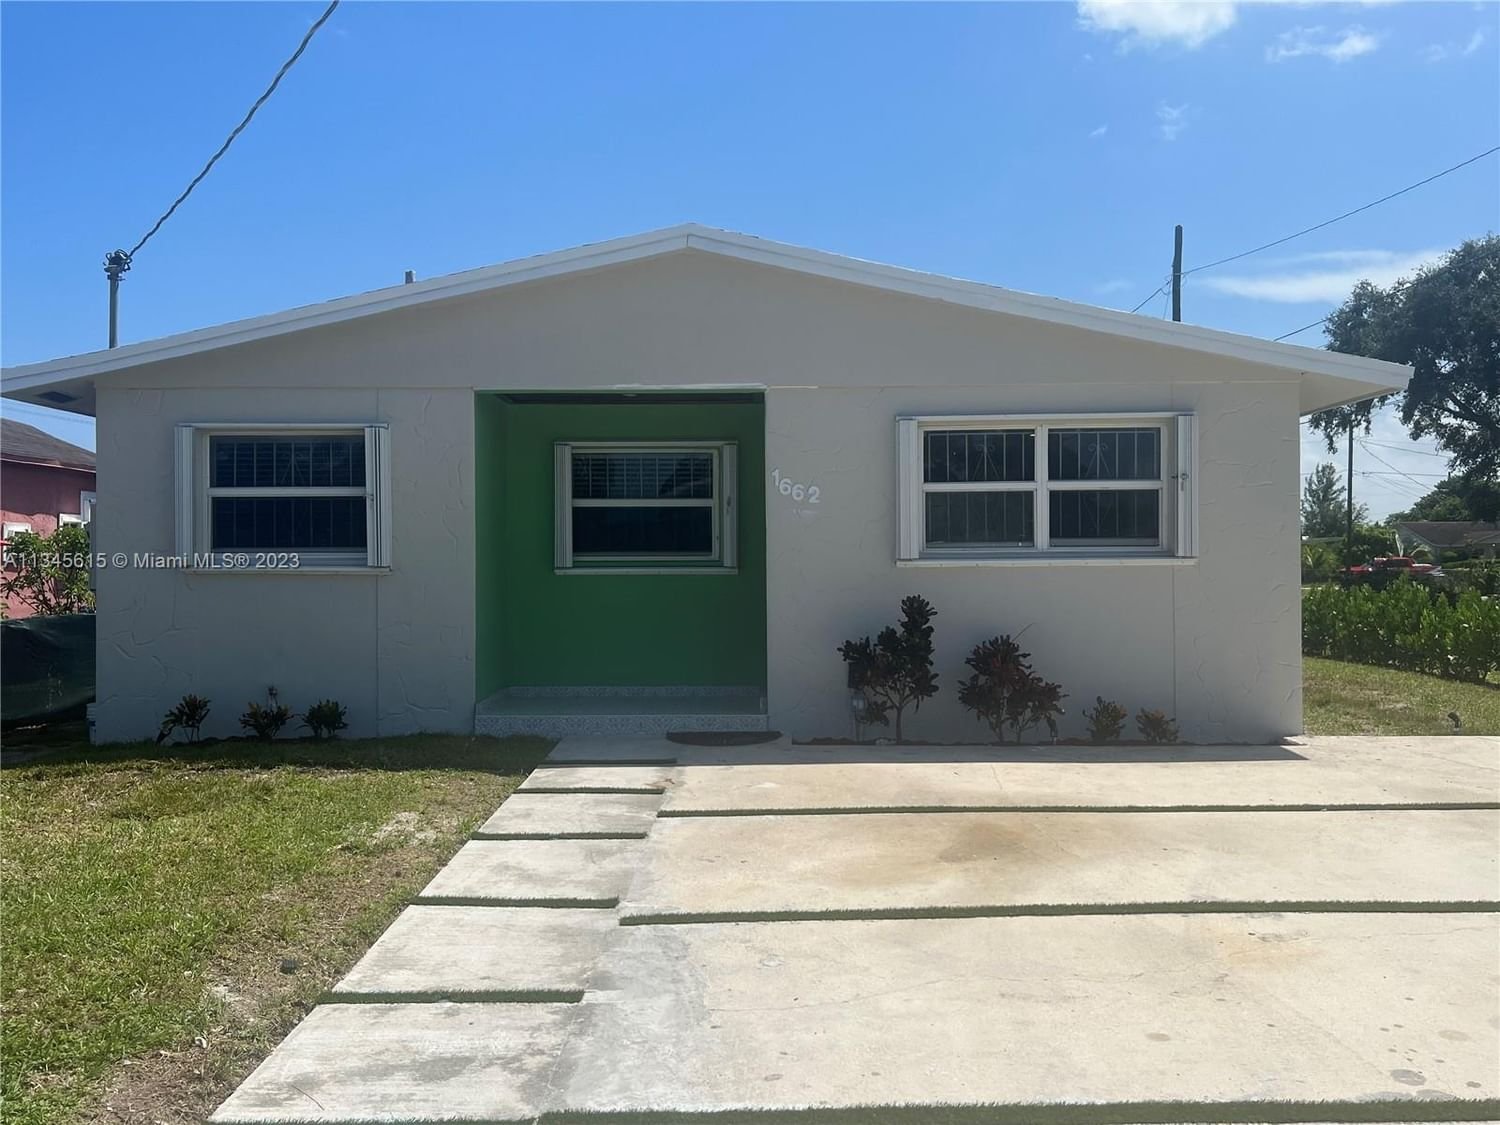 Real estate property located at 1662 152nd Ter, Miami-Dade County, RAINBOW GARDENS, Miami Gardens, FL